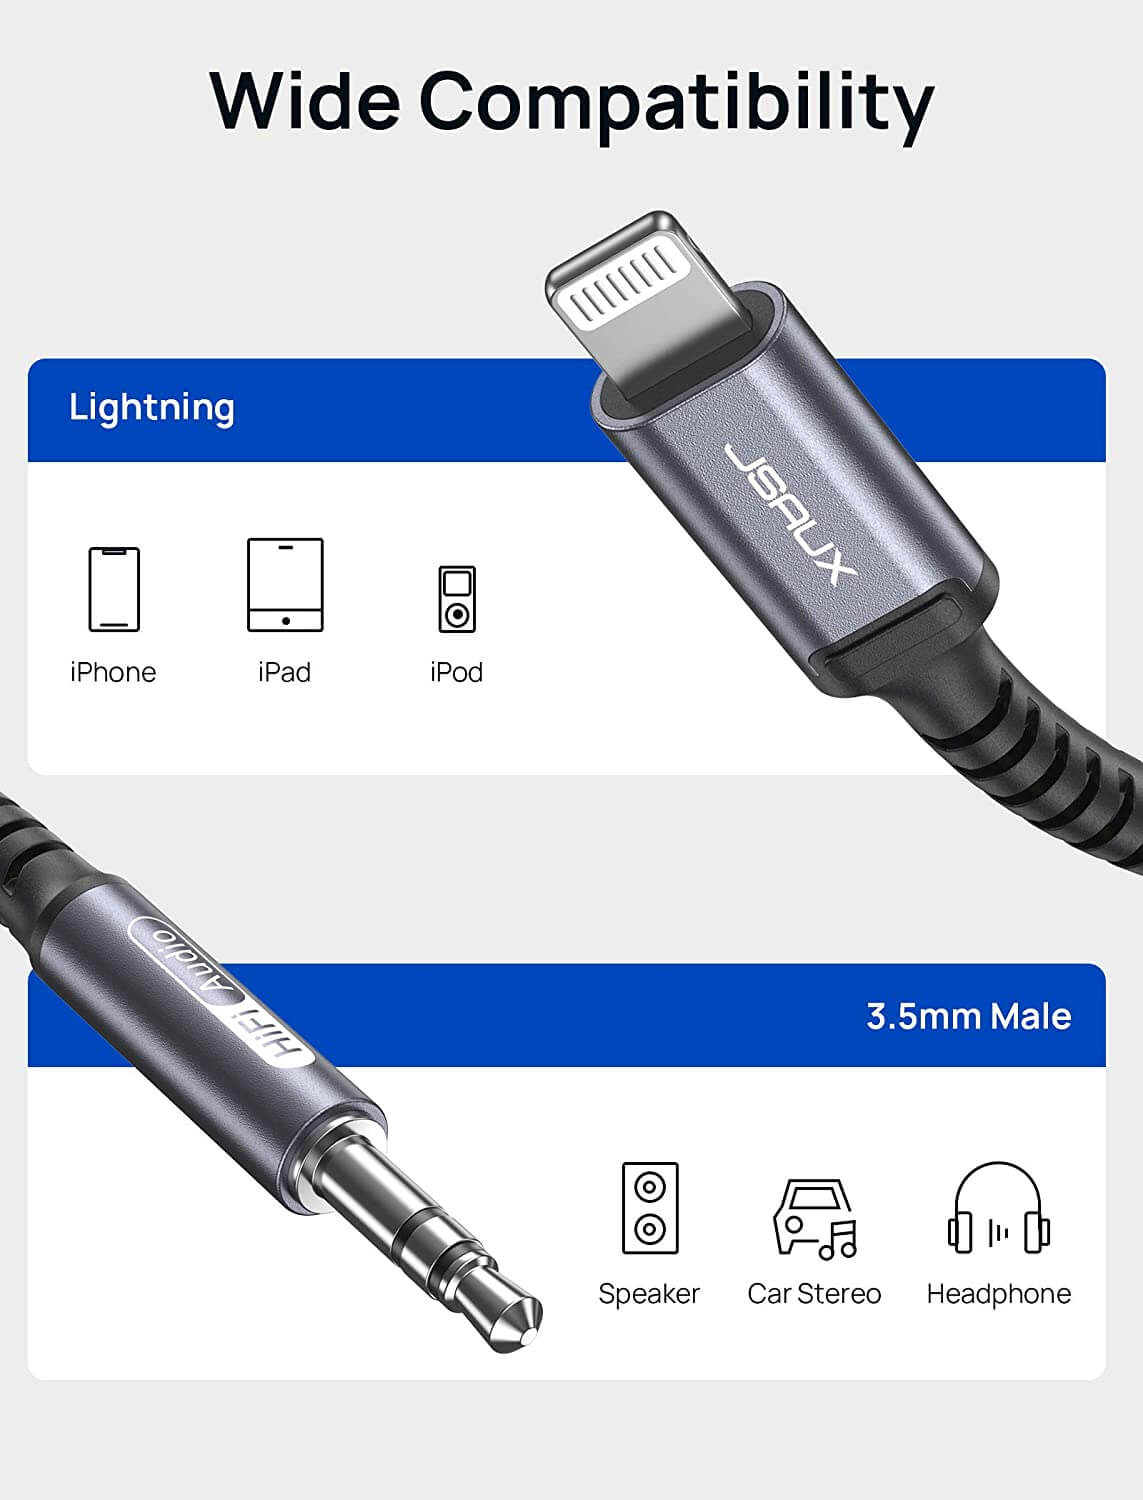 MFi Lightning to 3.5mm Audio Cable